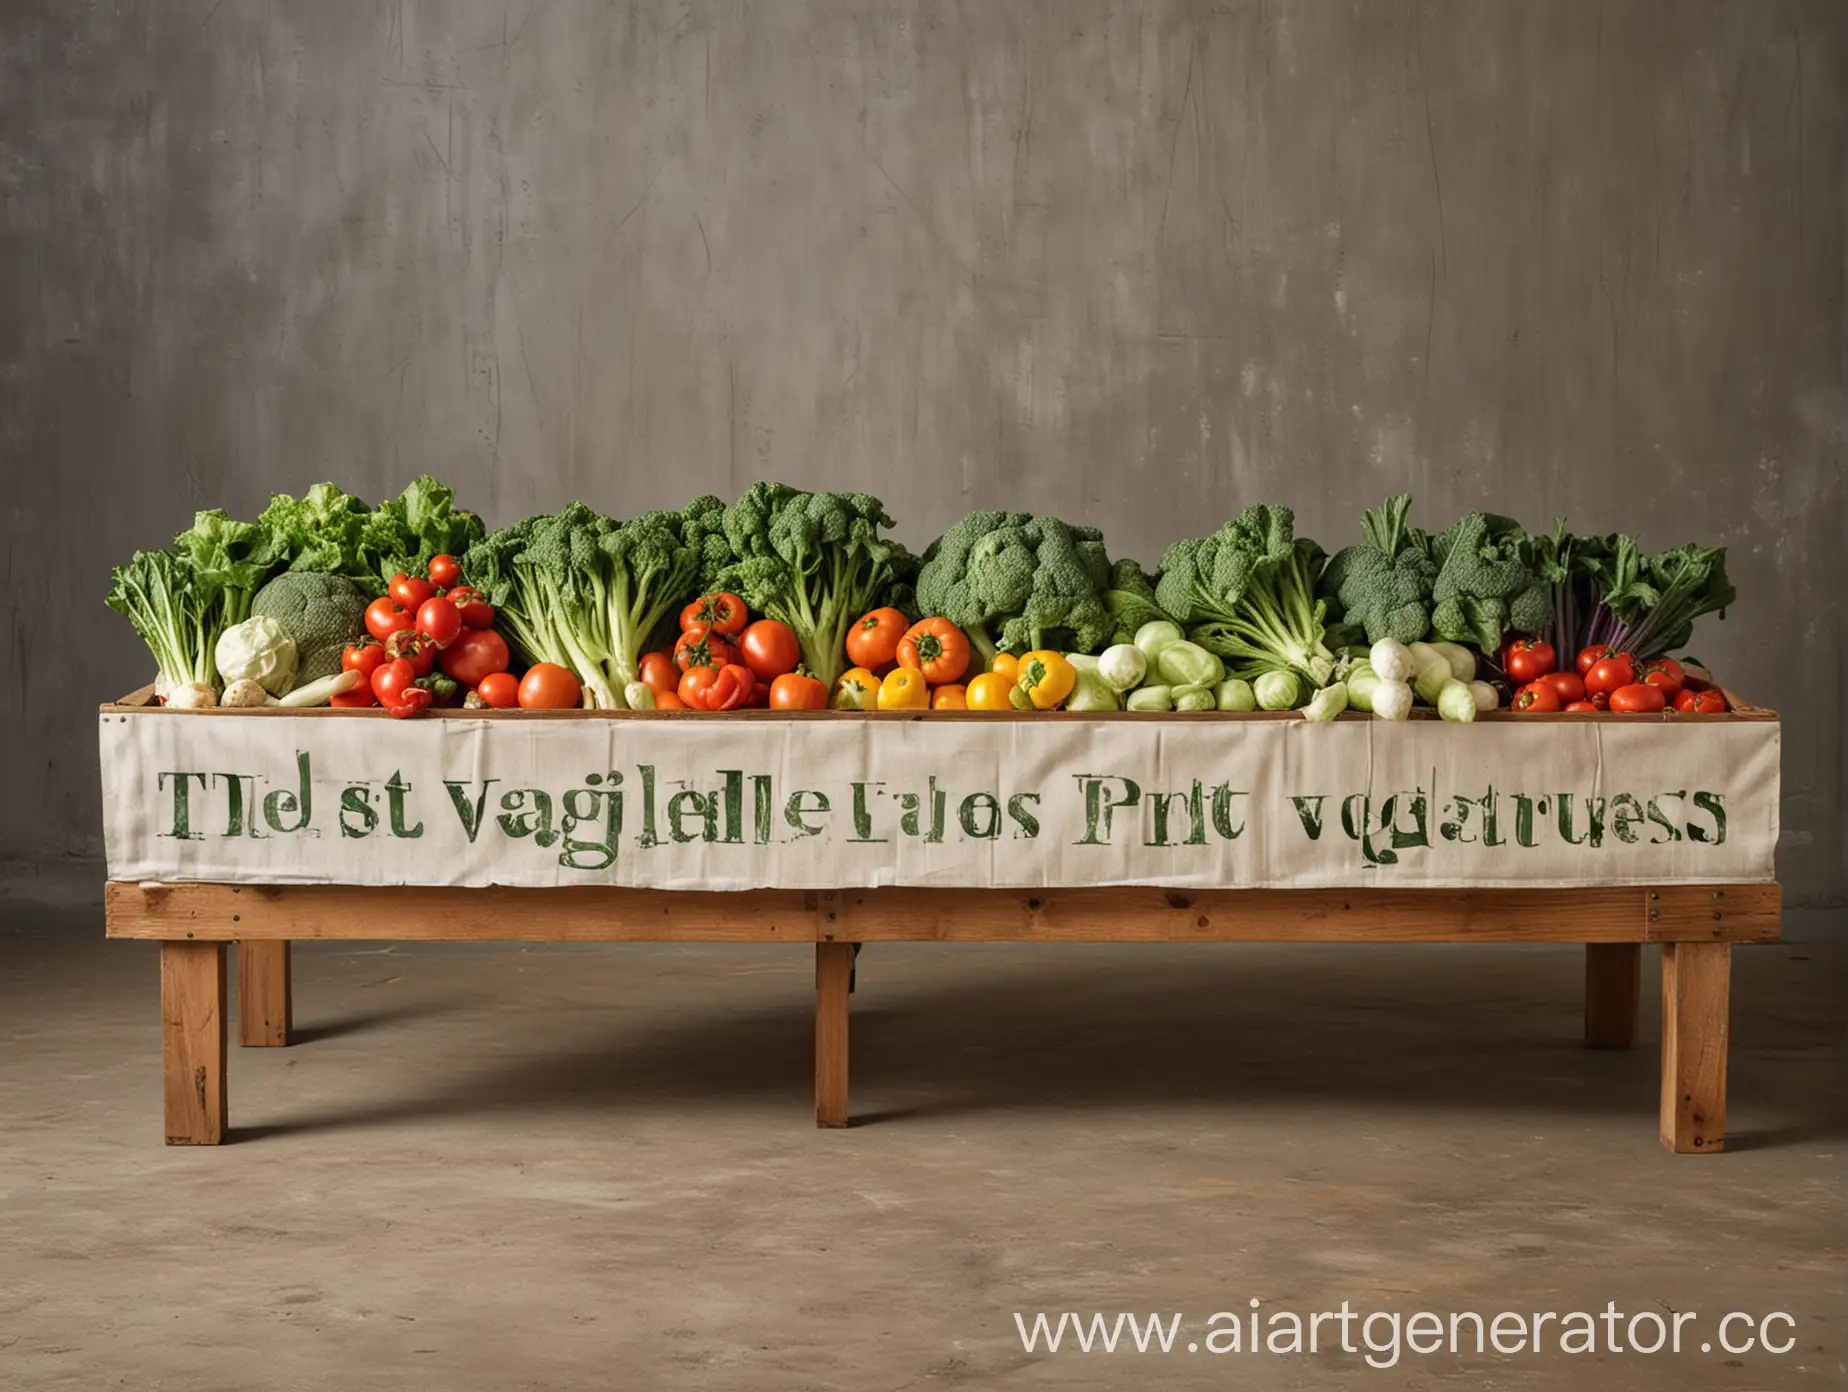 Colorful-Vegetable-Stand-Banner-Fresh-Produce-Display